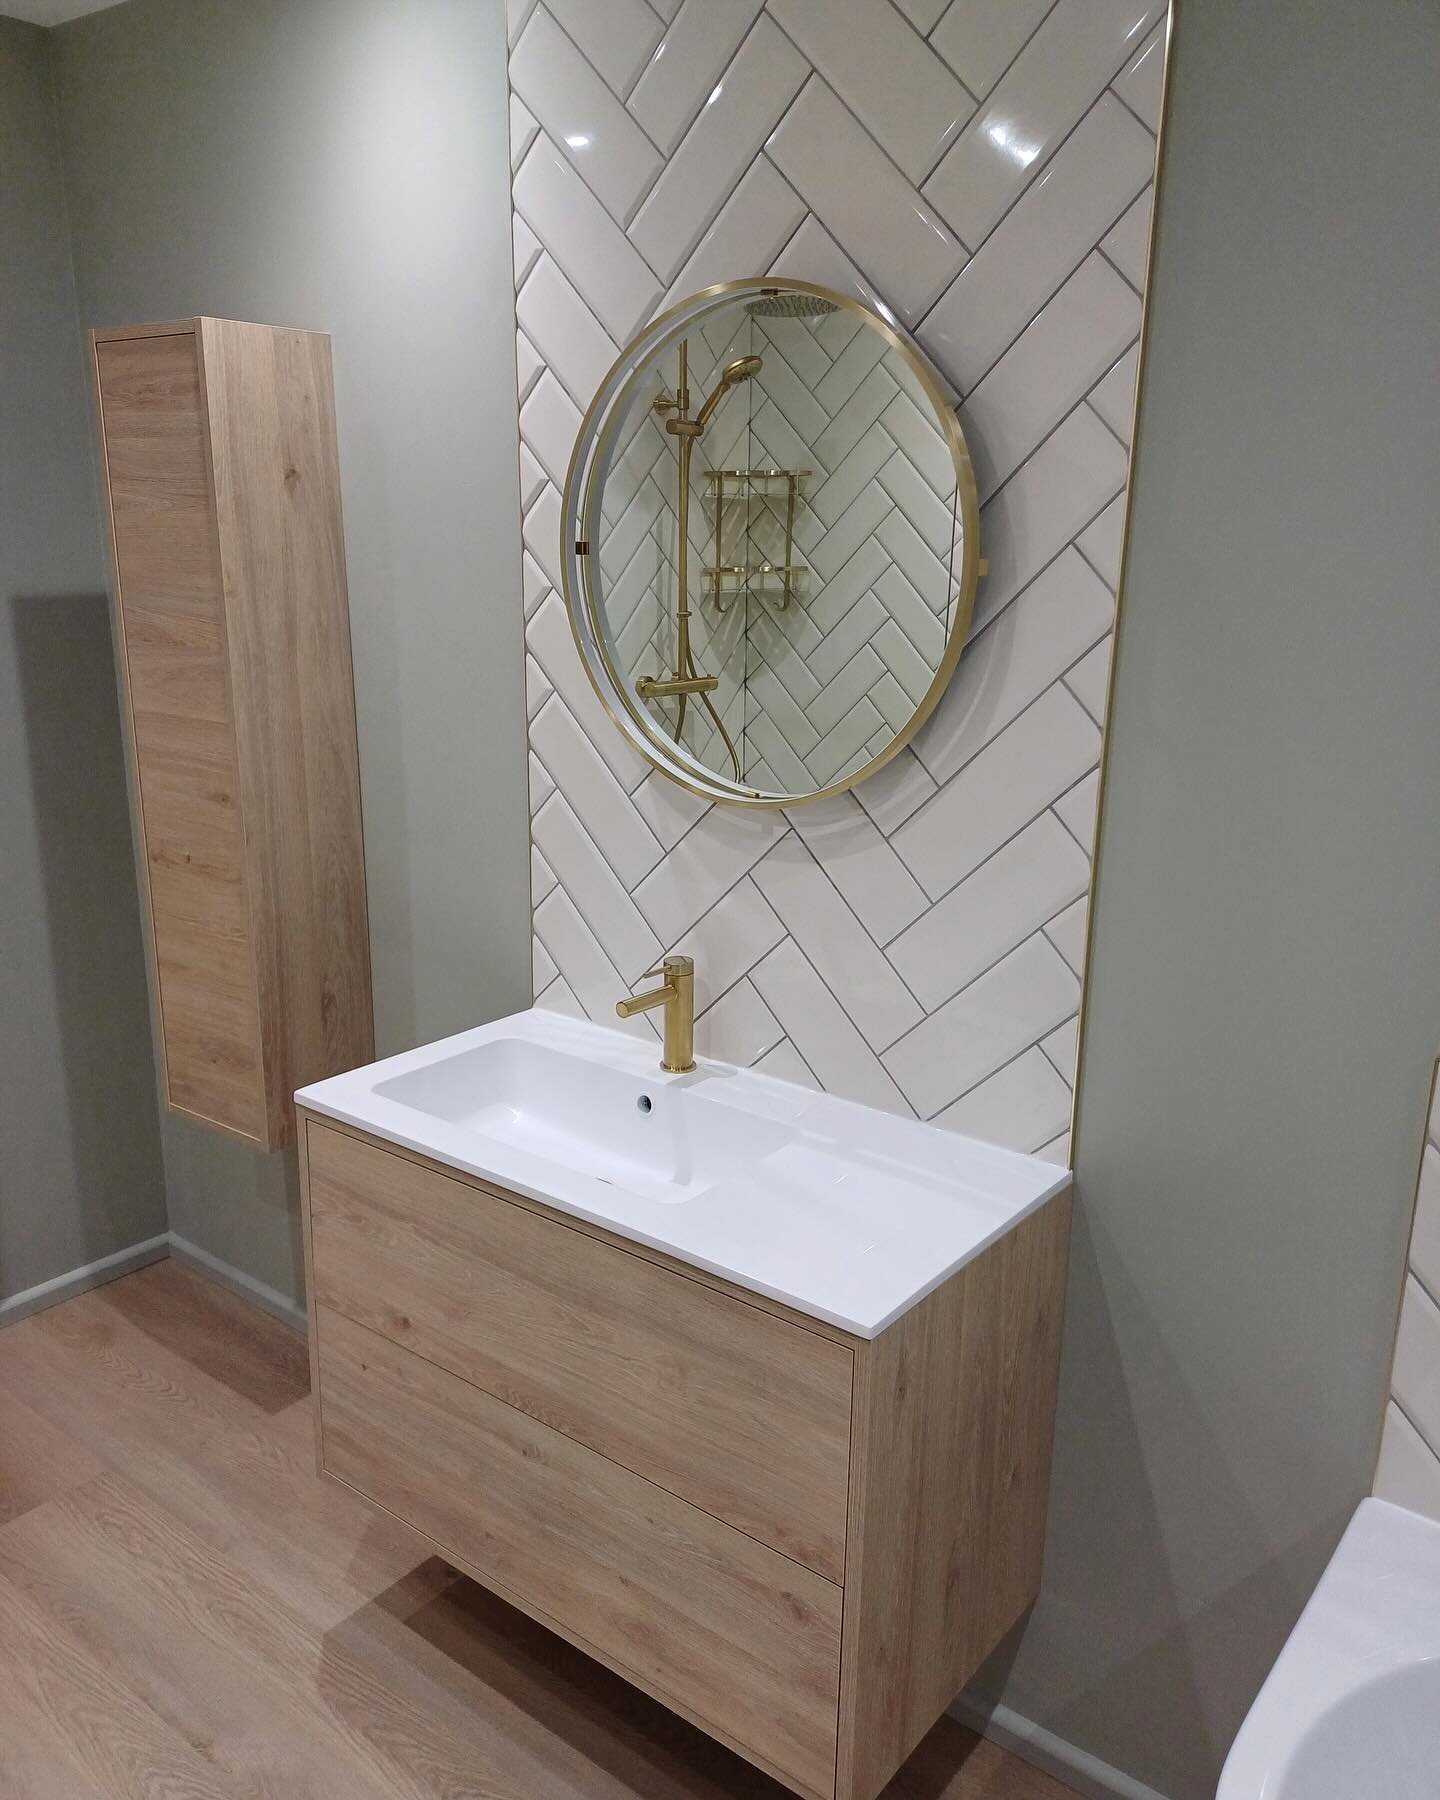 Some finished photos sent over by our customer who we recently supplied their bathroom products. What a fantastic looking bathroom! Such a spacious room too. Toilet is called Orbit and the brassware is the Anthem range from @tavistockbathrooms . The 